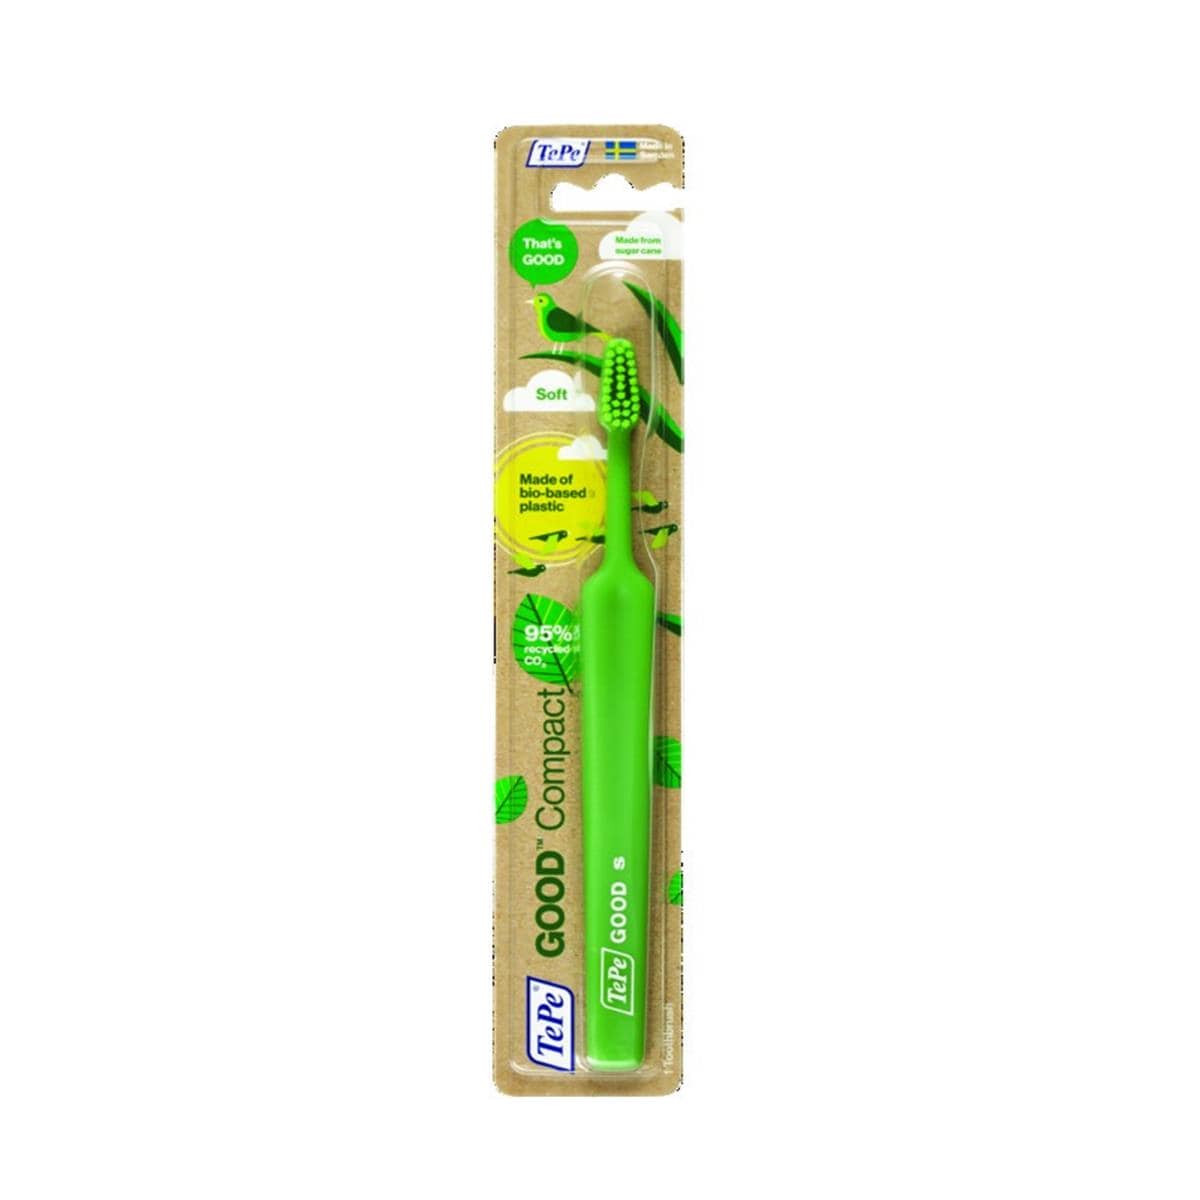 Brosse  dents compact souple (14 pices) Tepe Good